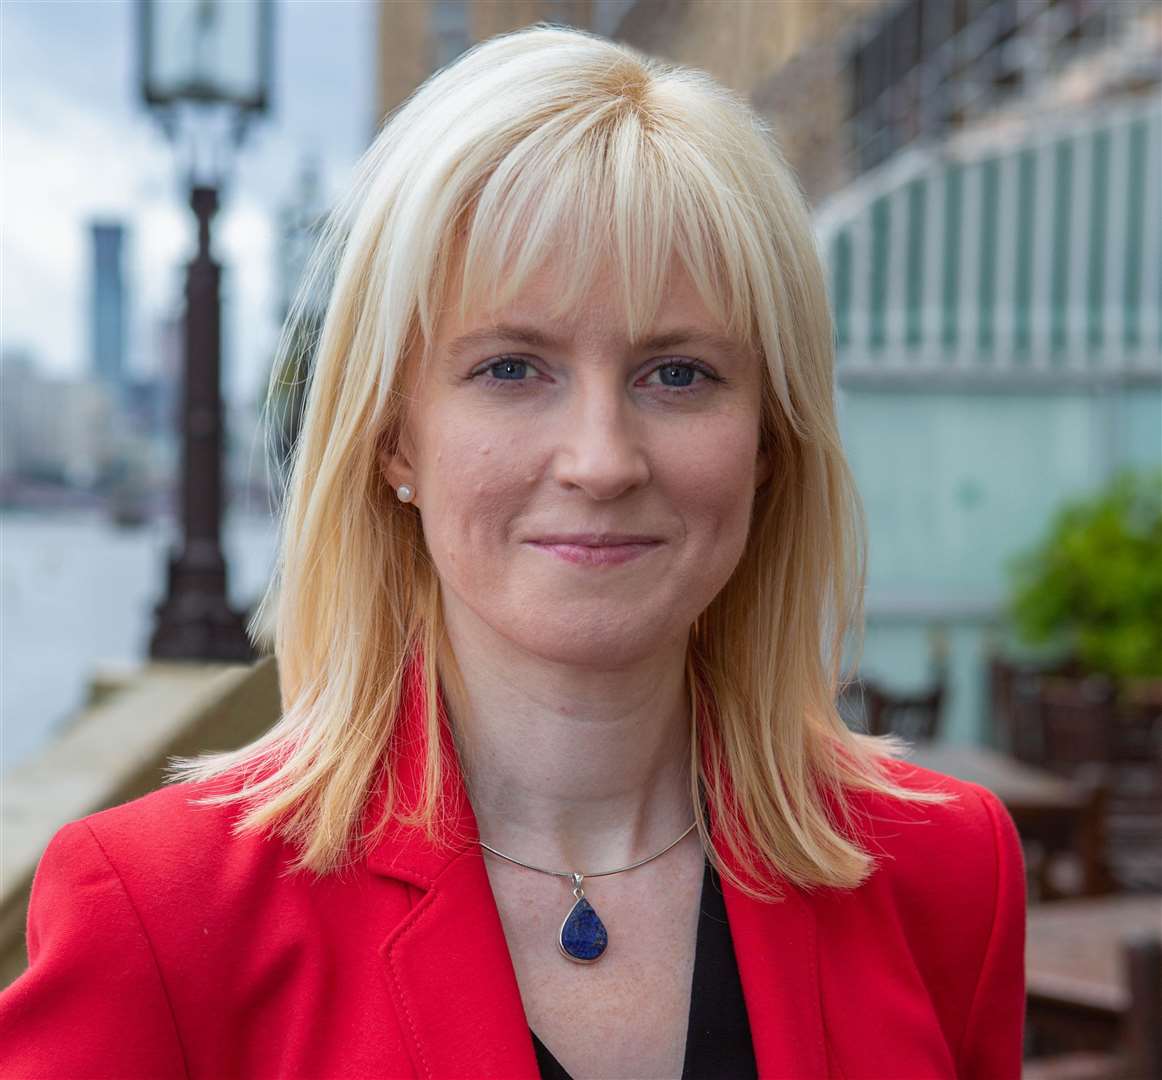 Labour MP Rosie Duffield says the party needs to focus more on the South East